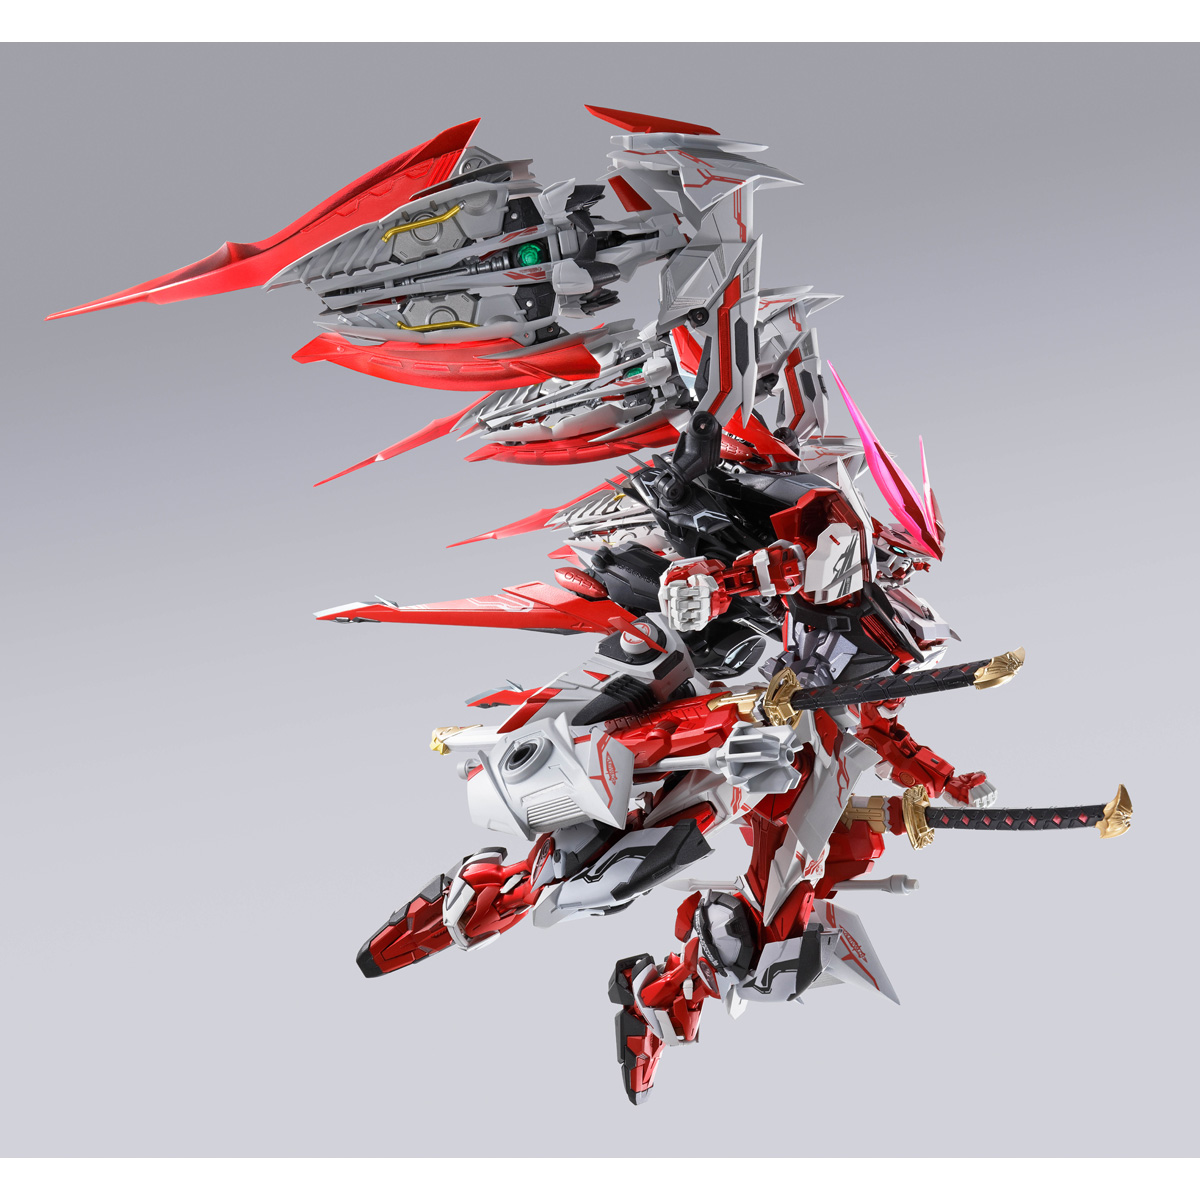 METAL BUILD GUNDAM ASTRAY RED DRAGONICS [Oct 2022 Delivery]